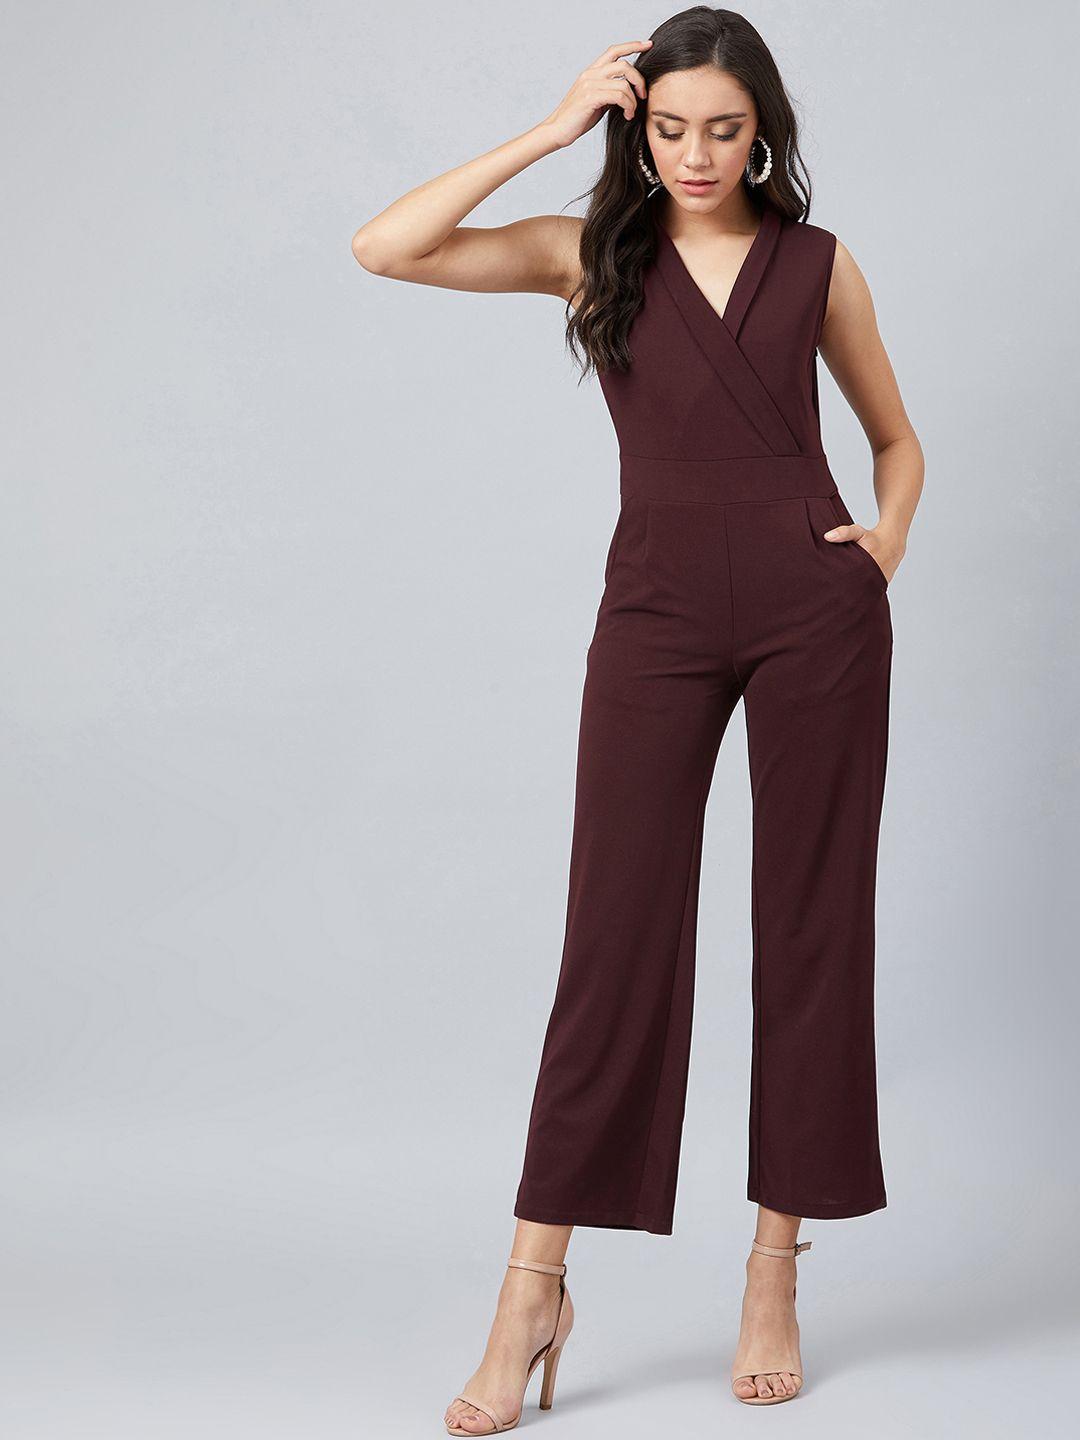 athena women brown solid basic jumpsuit